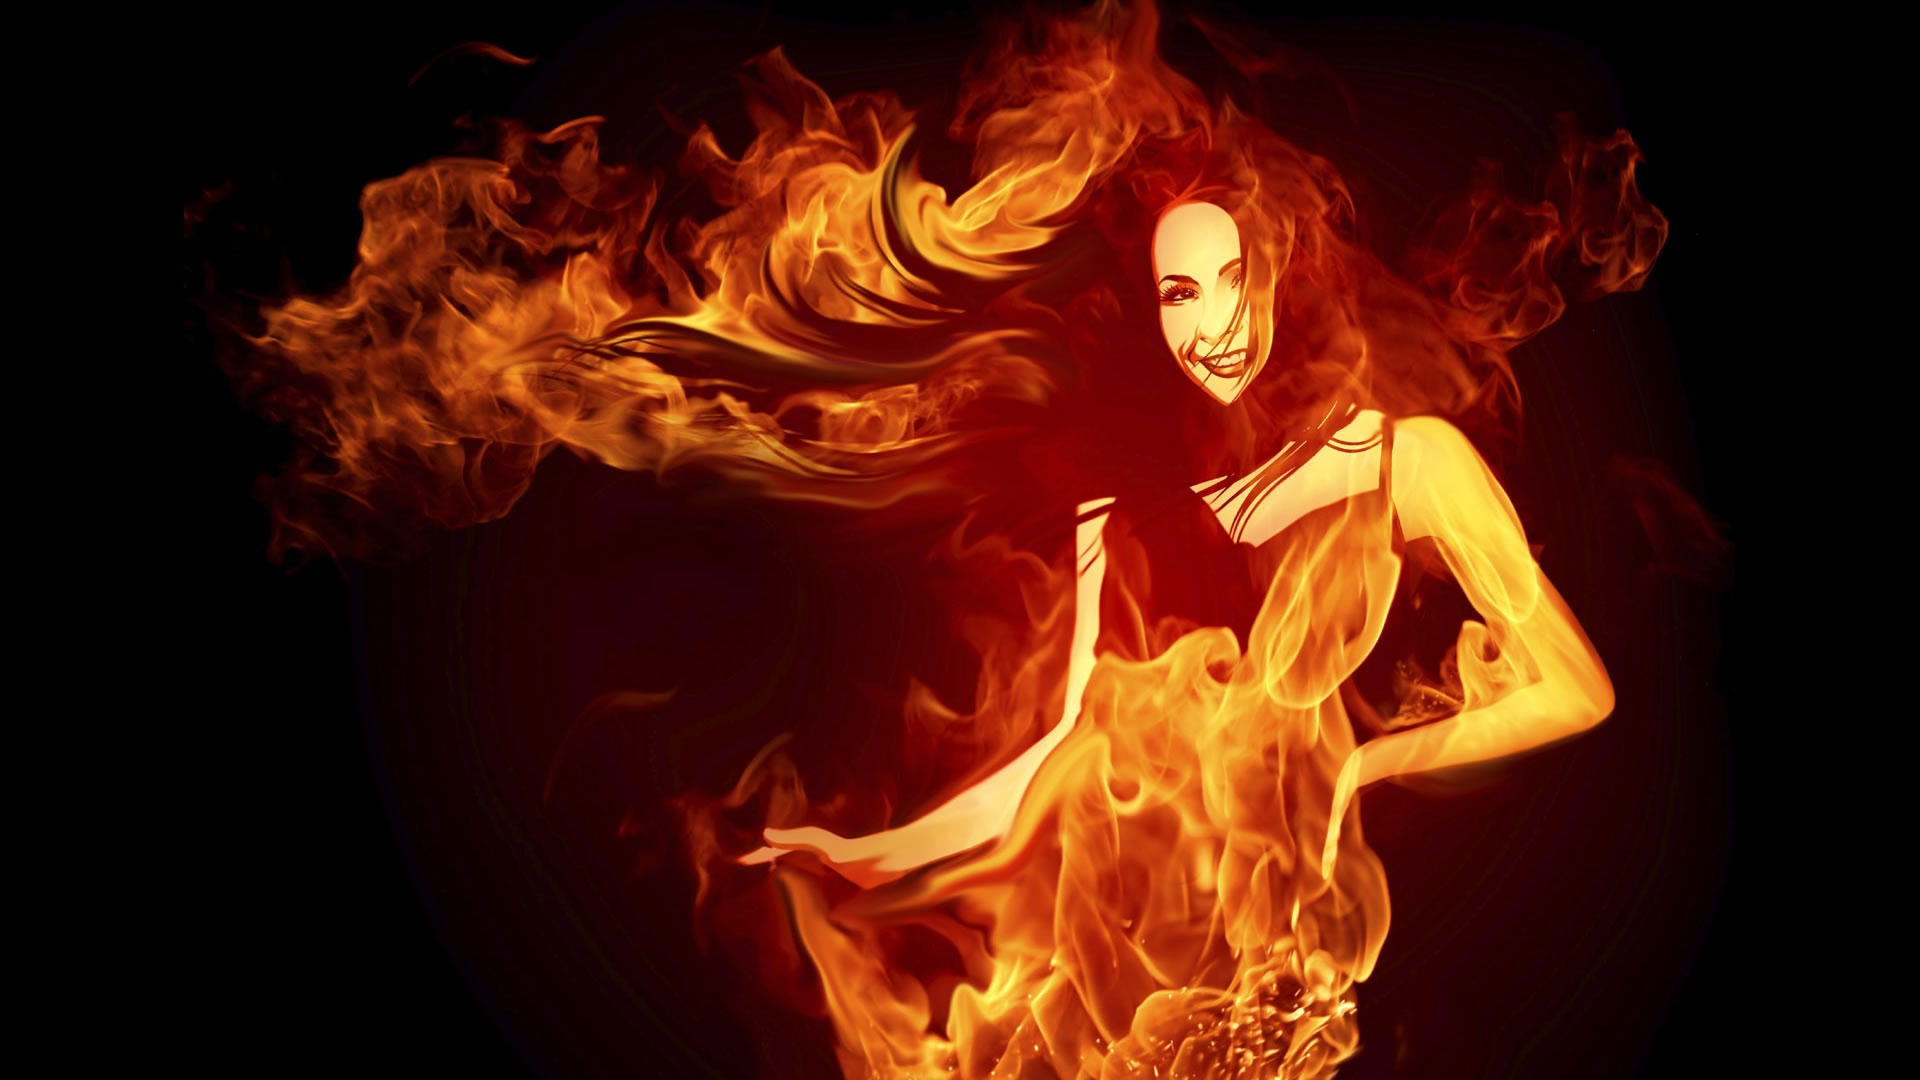 Woman in Fire for 1920 x 1080 HDTV 1080p resolution